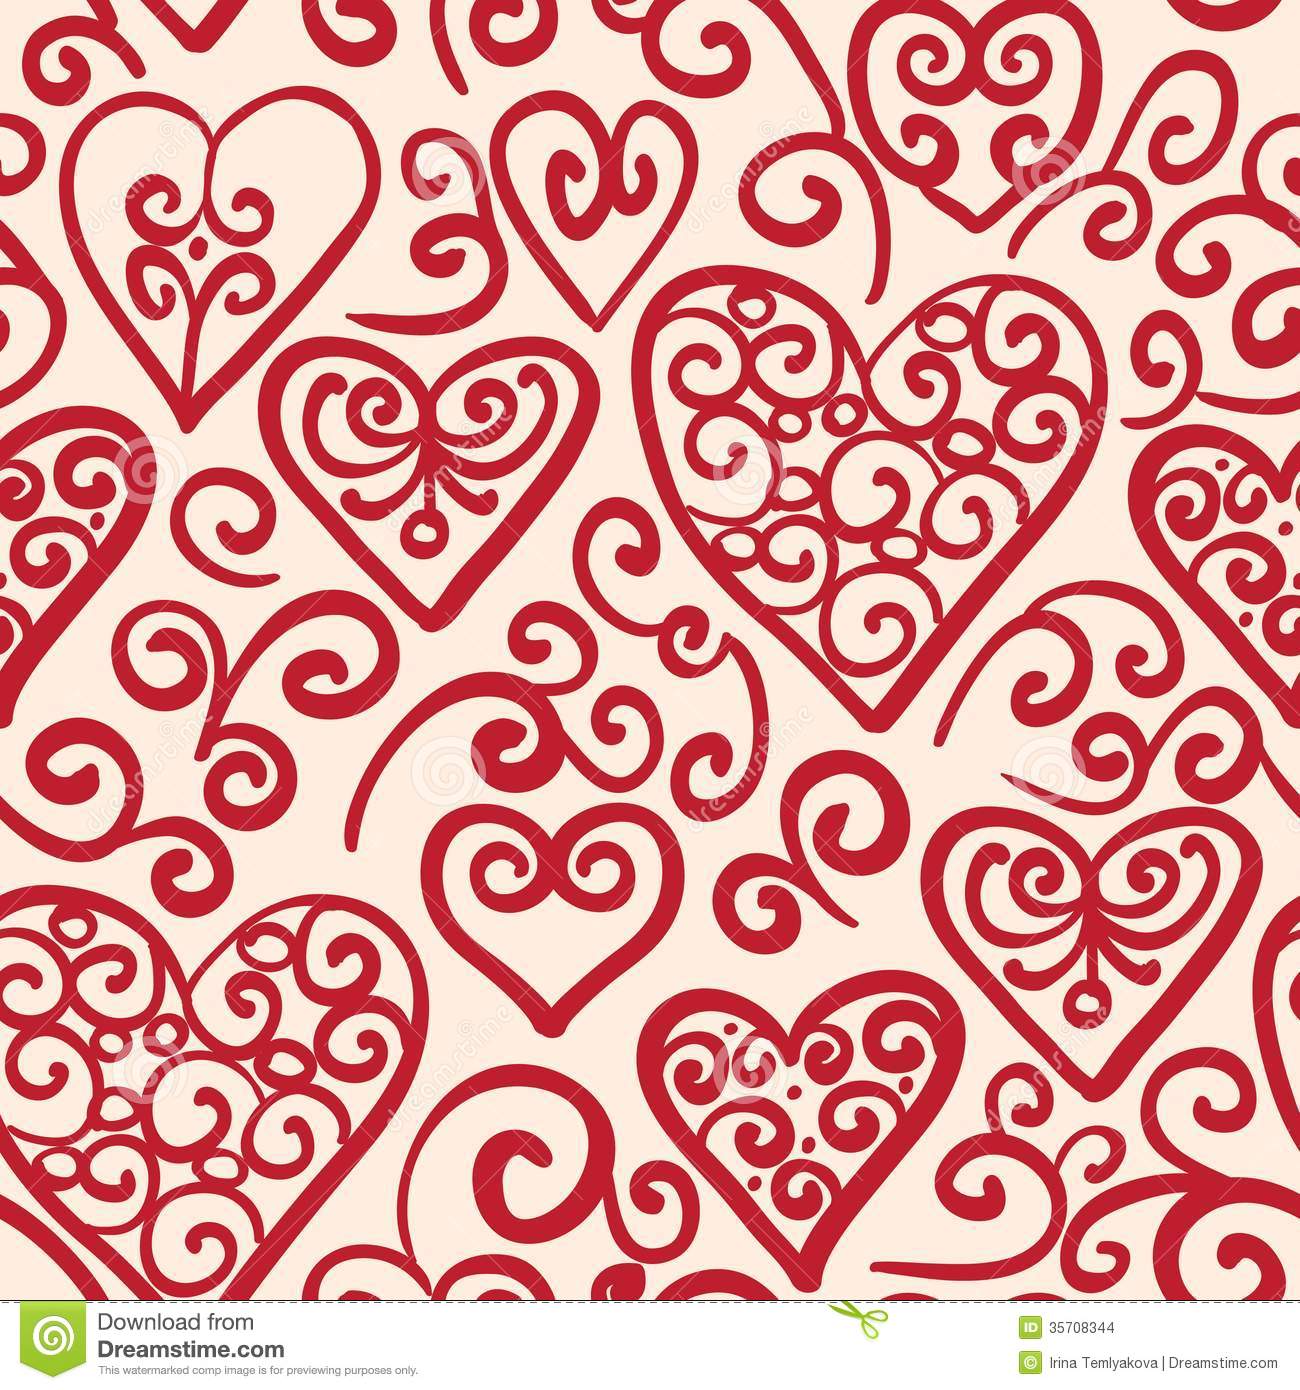 Cool Designs Patterns Hearts